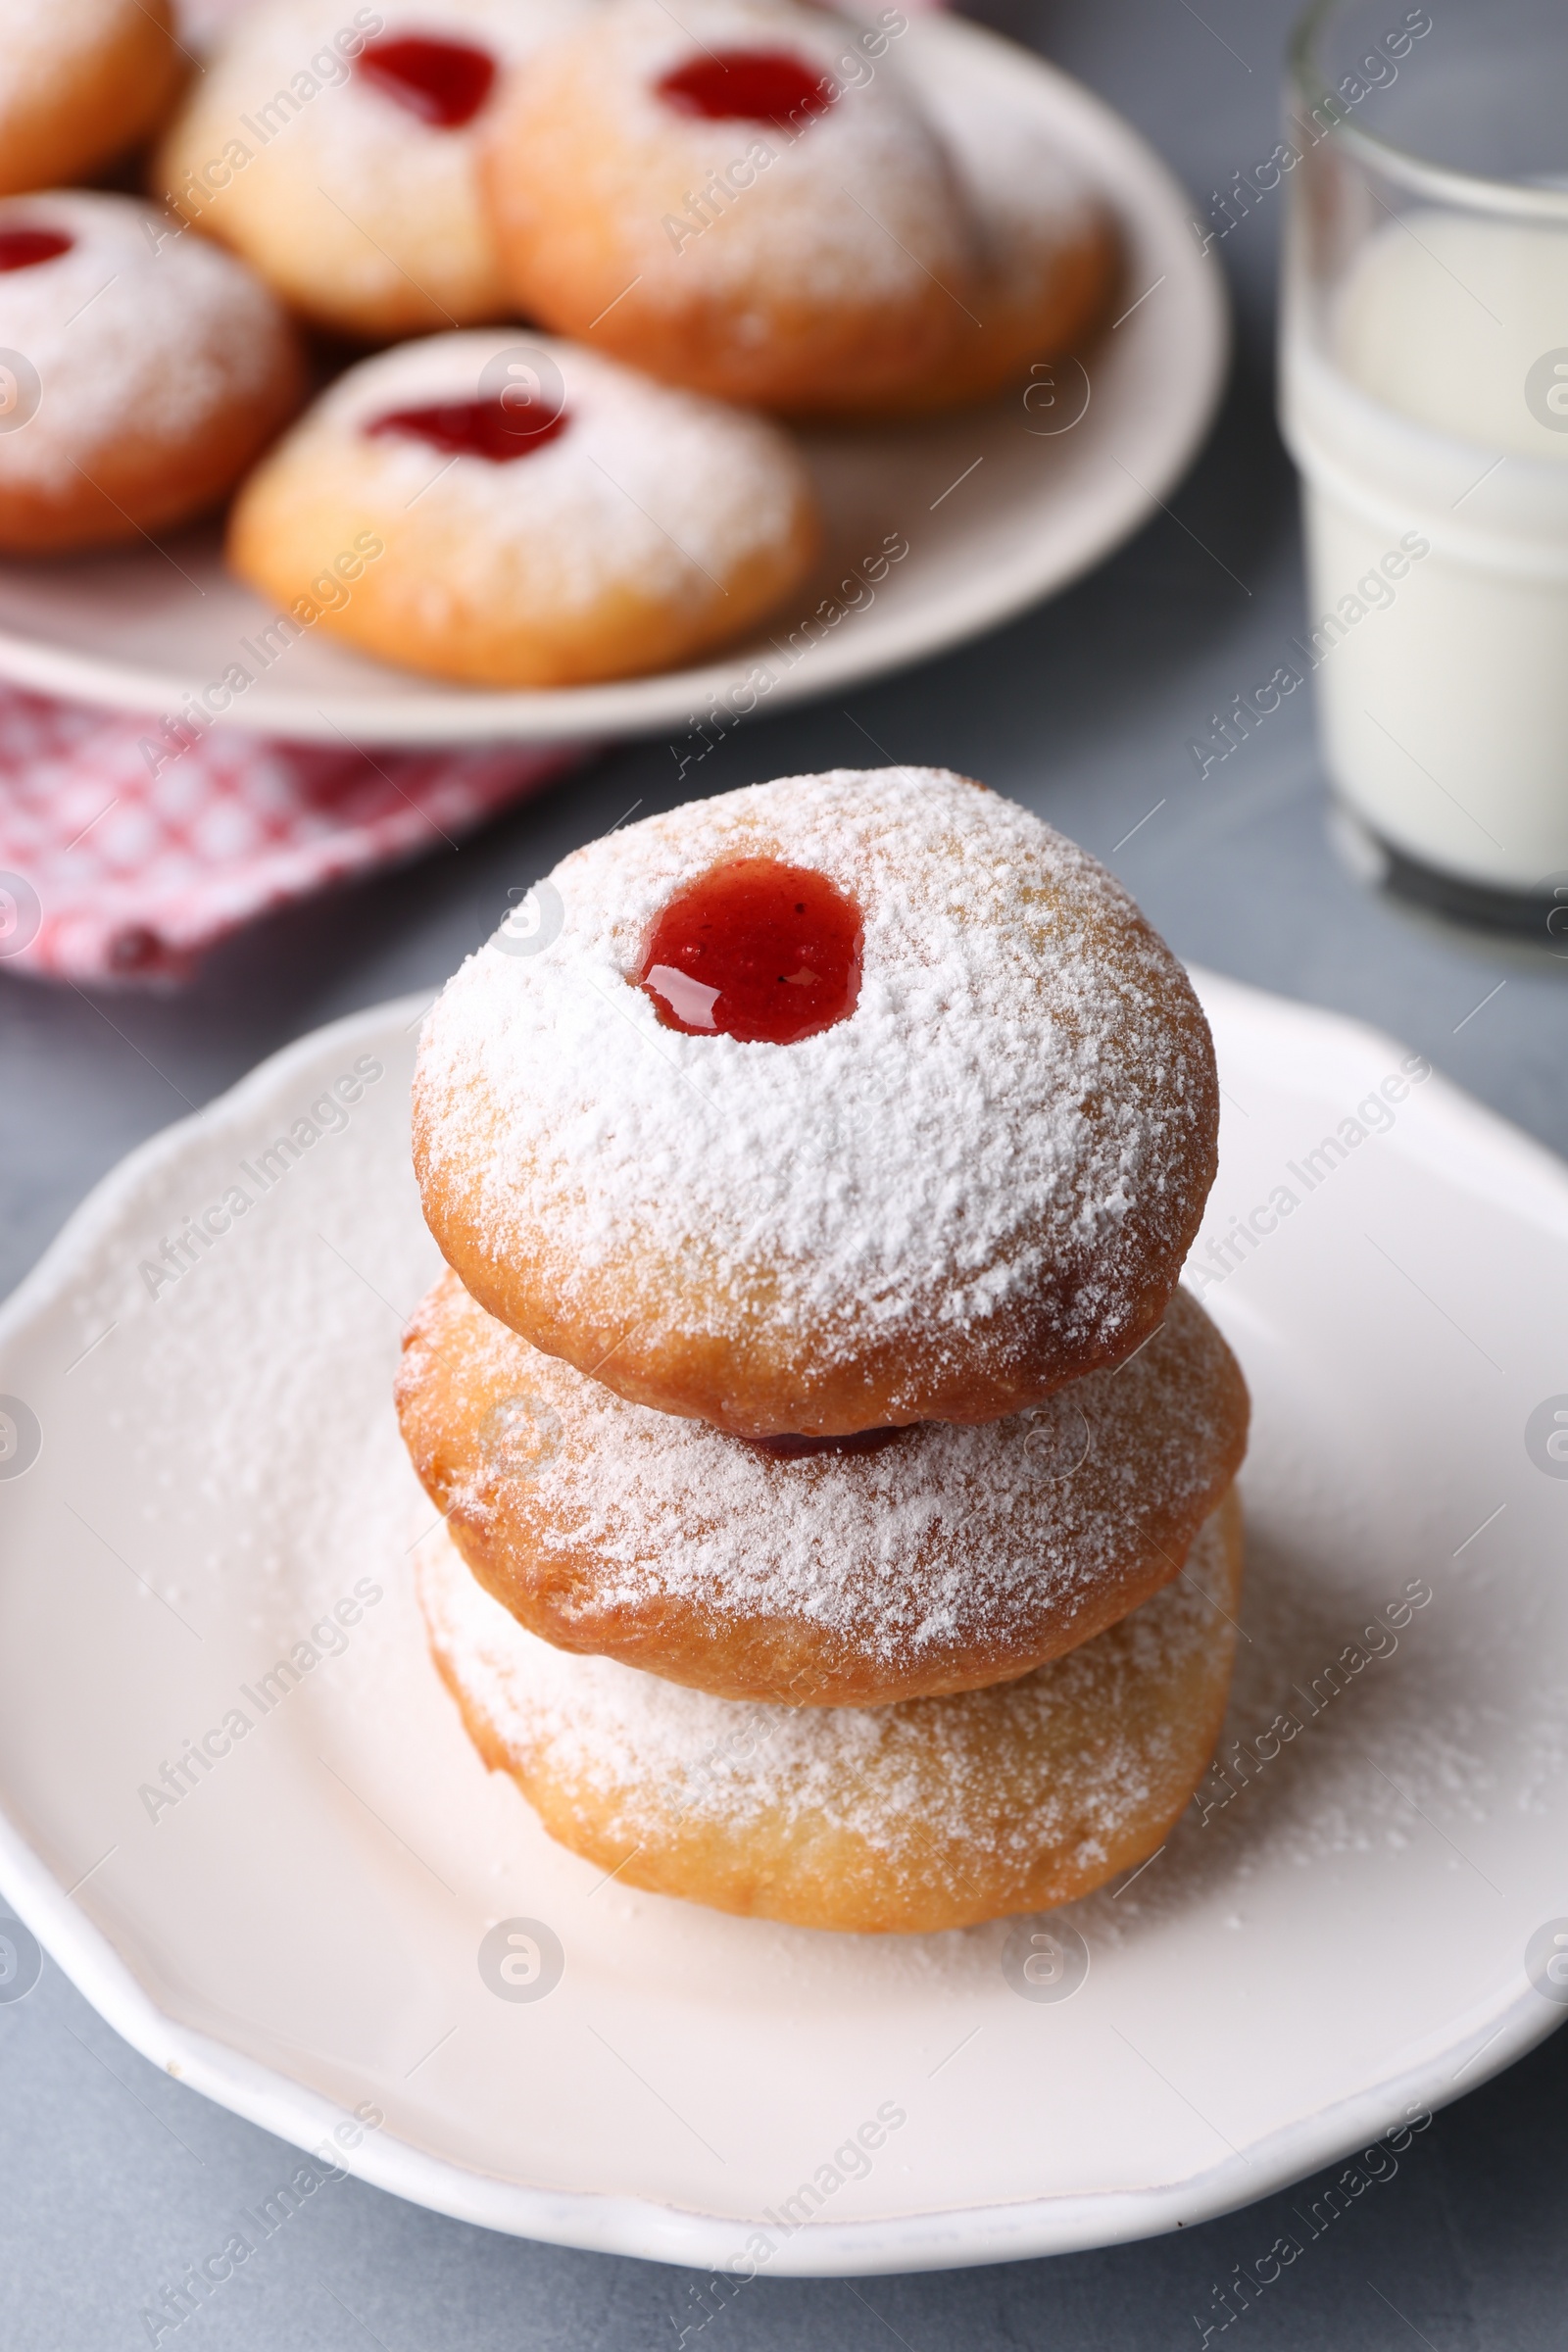 Photo of Hanukkah donuts with jelly and powdered sugar on light grey table